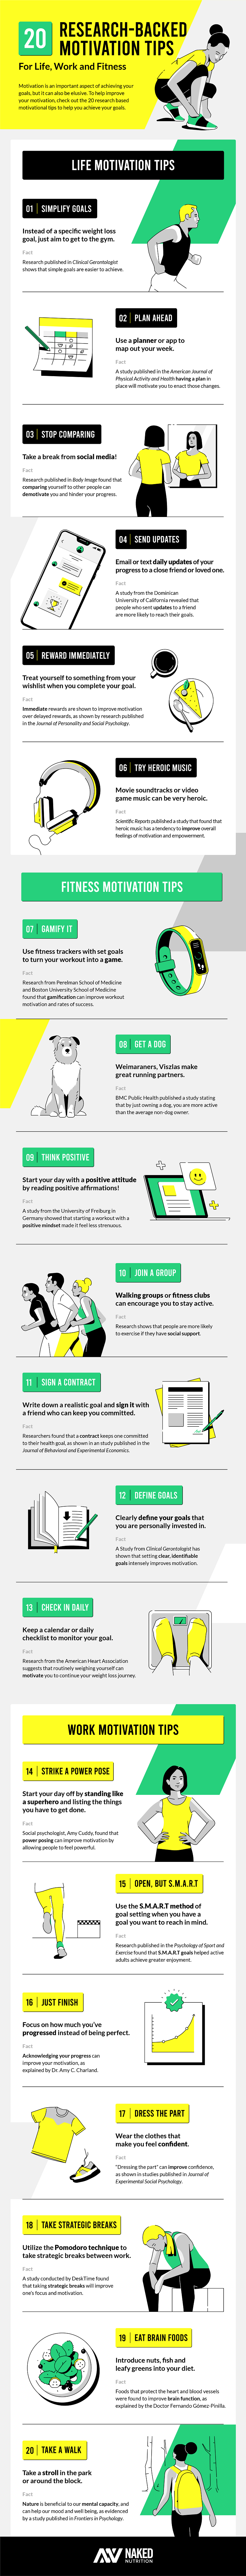 20 Science-Backed Ways to Stay Motivated (Infographic)